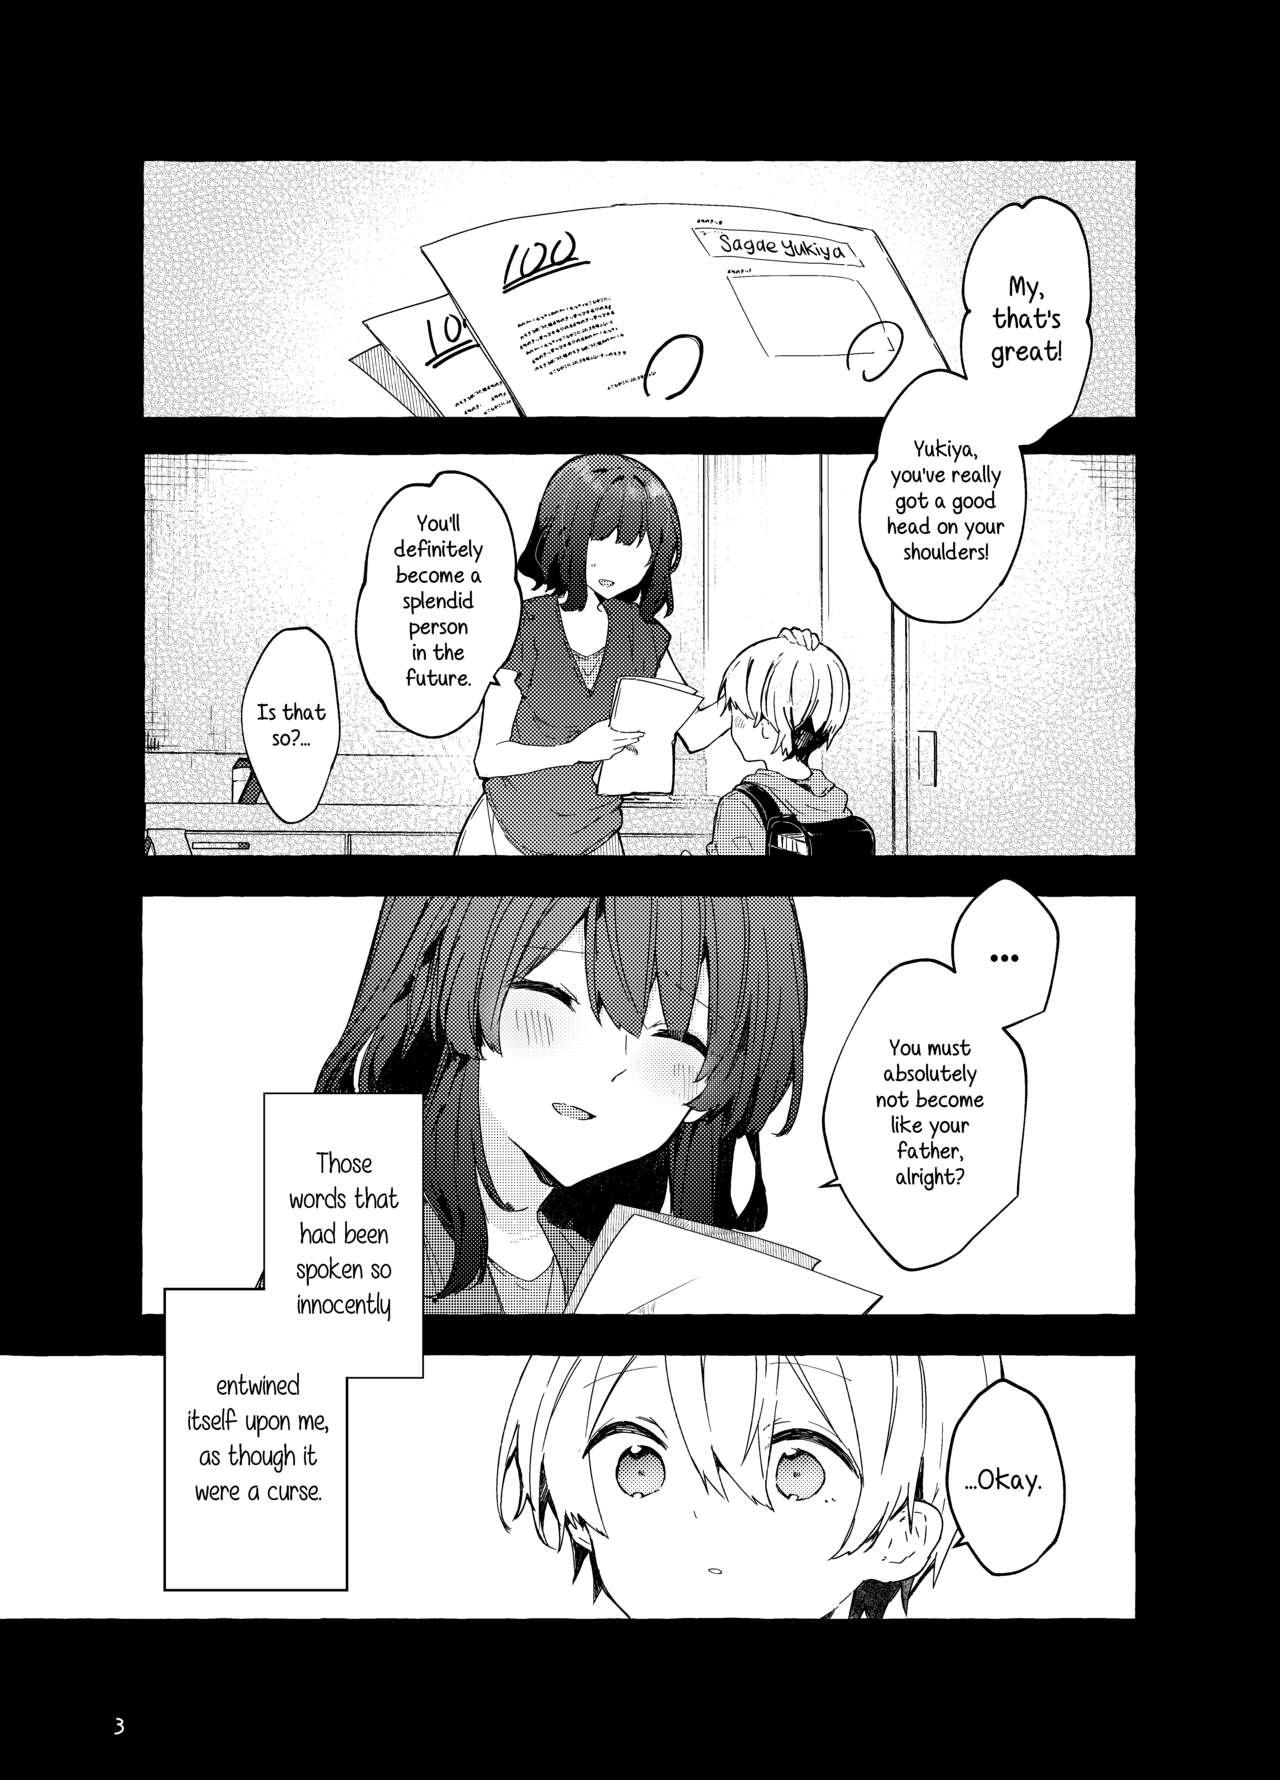 Swingers Kyou kara Waruiko. Zoku | I'll Be a Bad Kid From Now On. 2 - Original Young Tits - Page 4